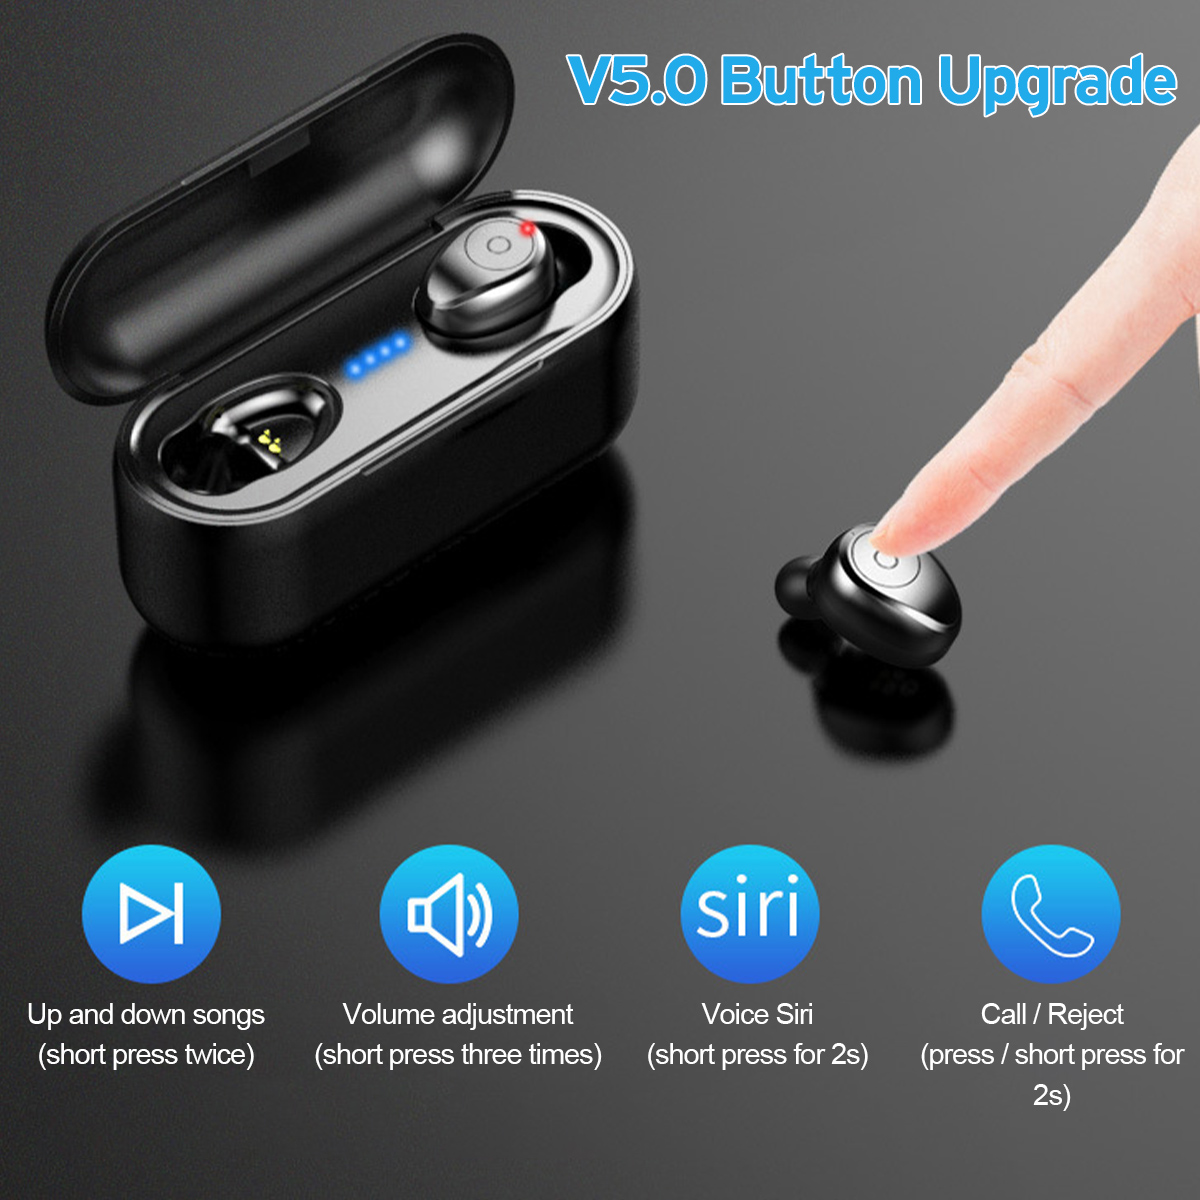 Mini-Wireless-Stereo-bluetooth-50-Earbuds-IPX7-Waterproof-Touch-Earphone-Noise-Reduction-Handsfree-H-1519860-8